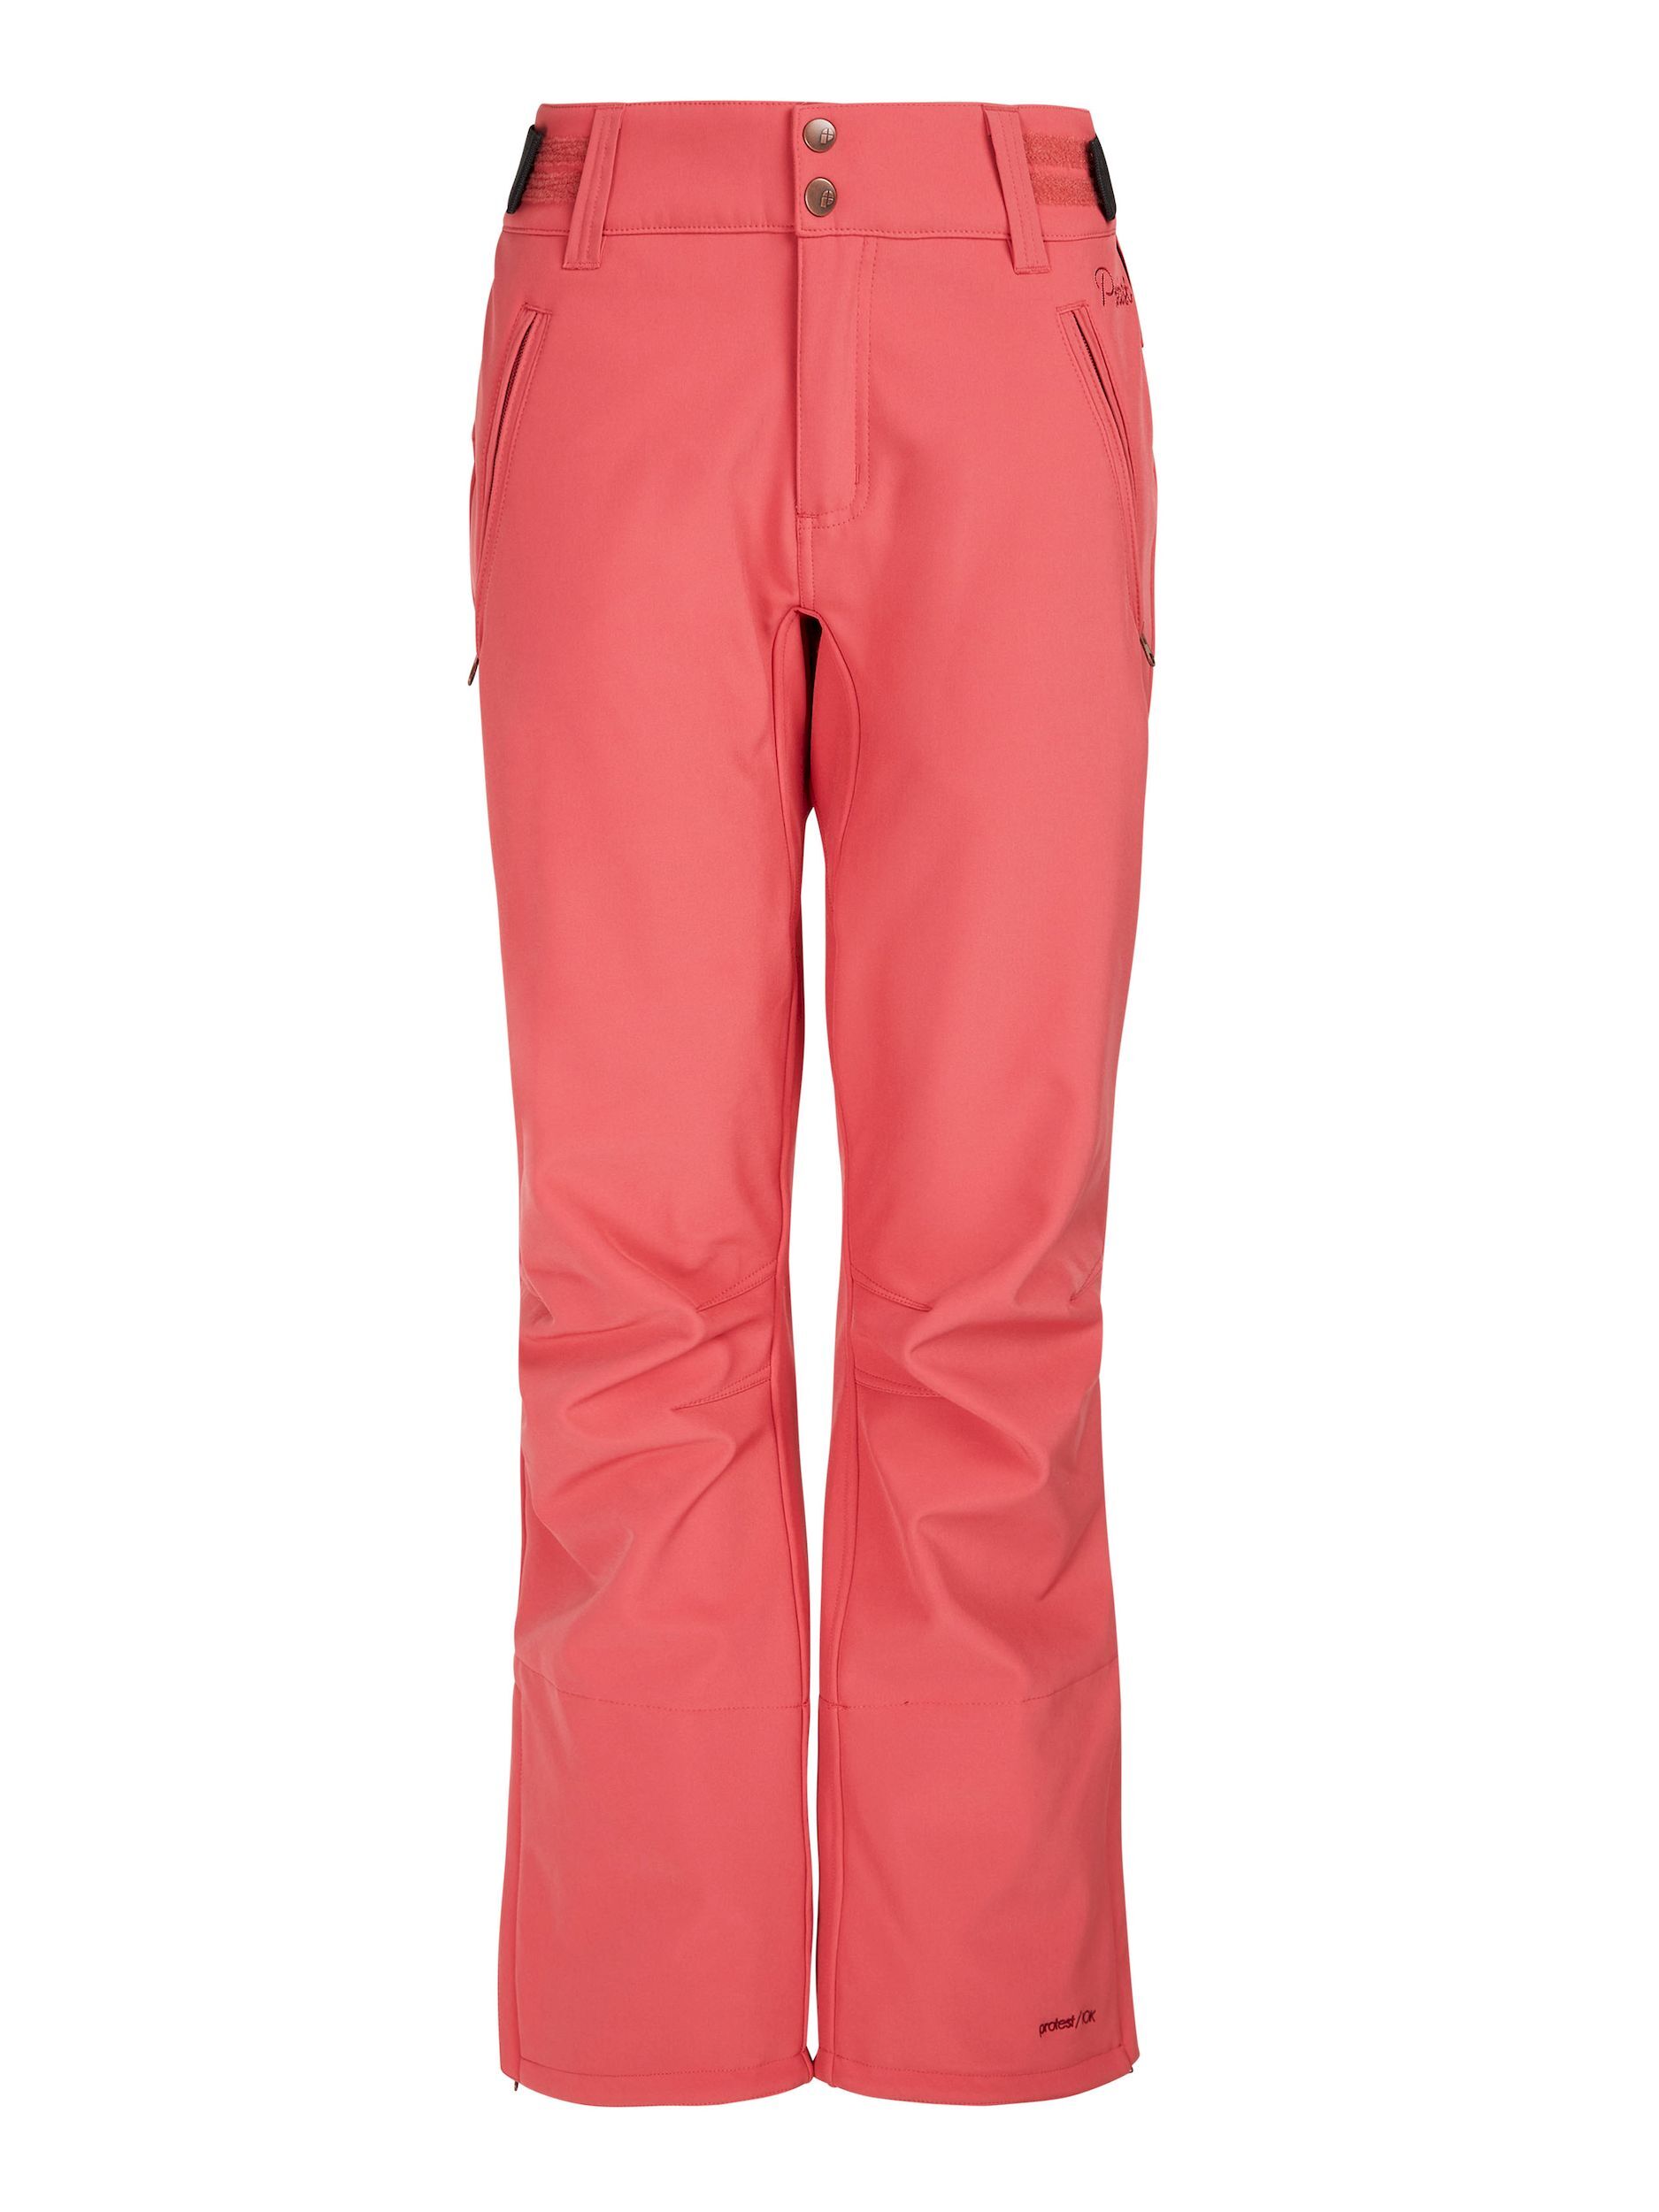 Protest Girls Lole Softshell Snowpants - Sample